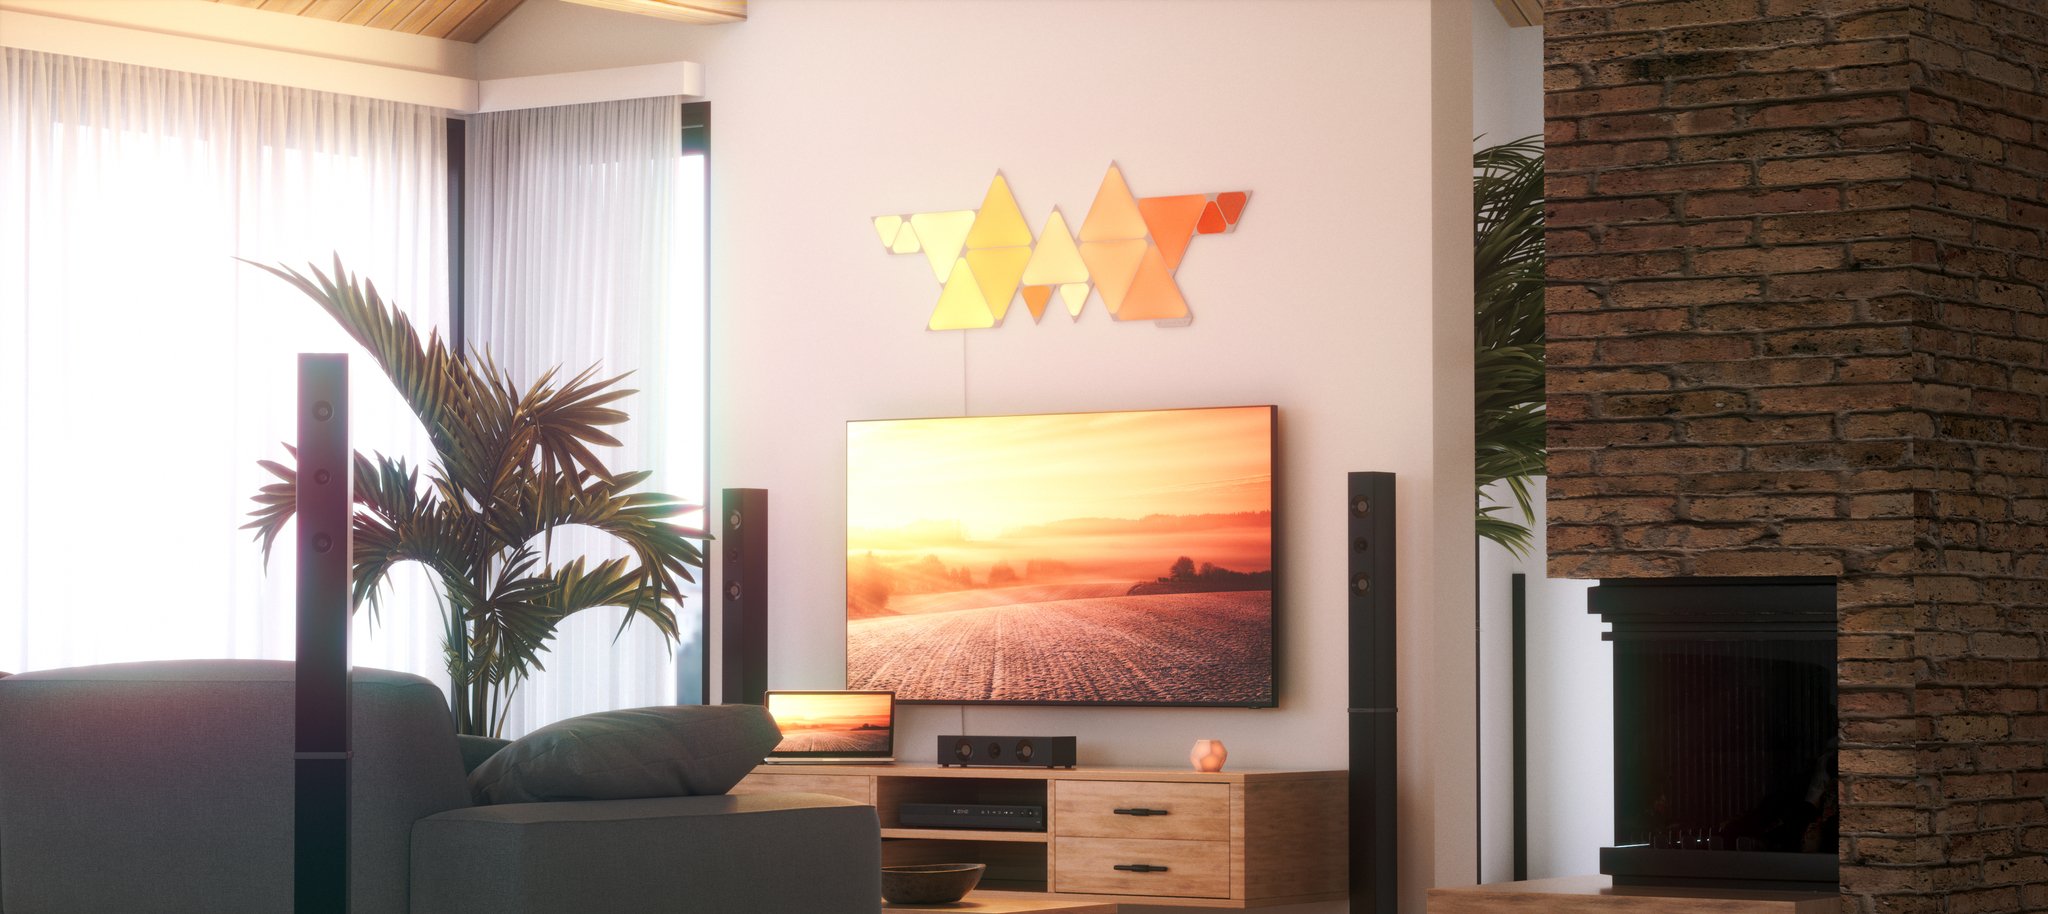 Nanoleaf Shapes Triangles Series above a television